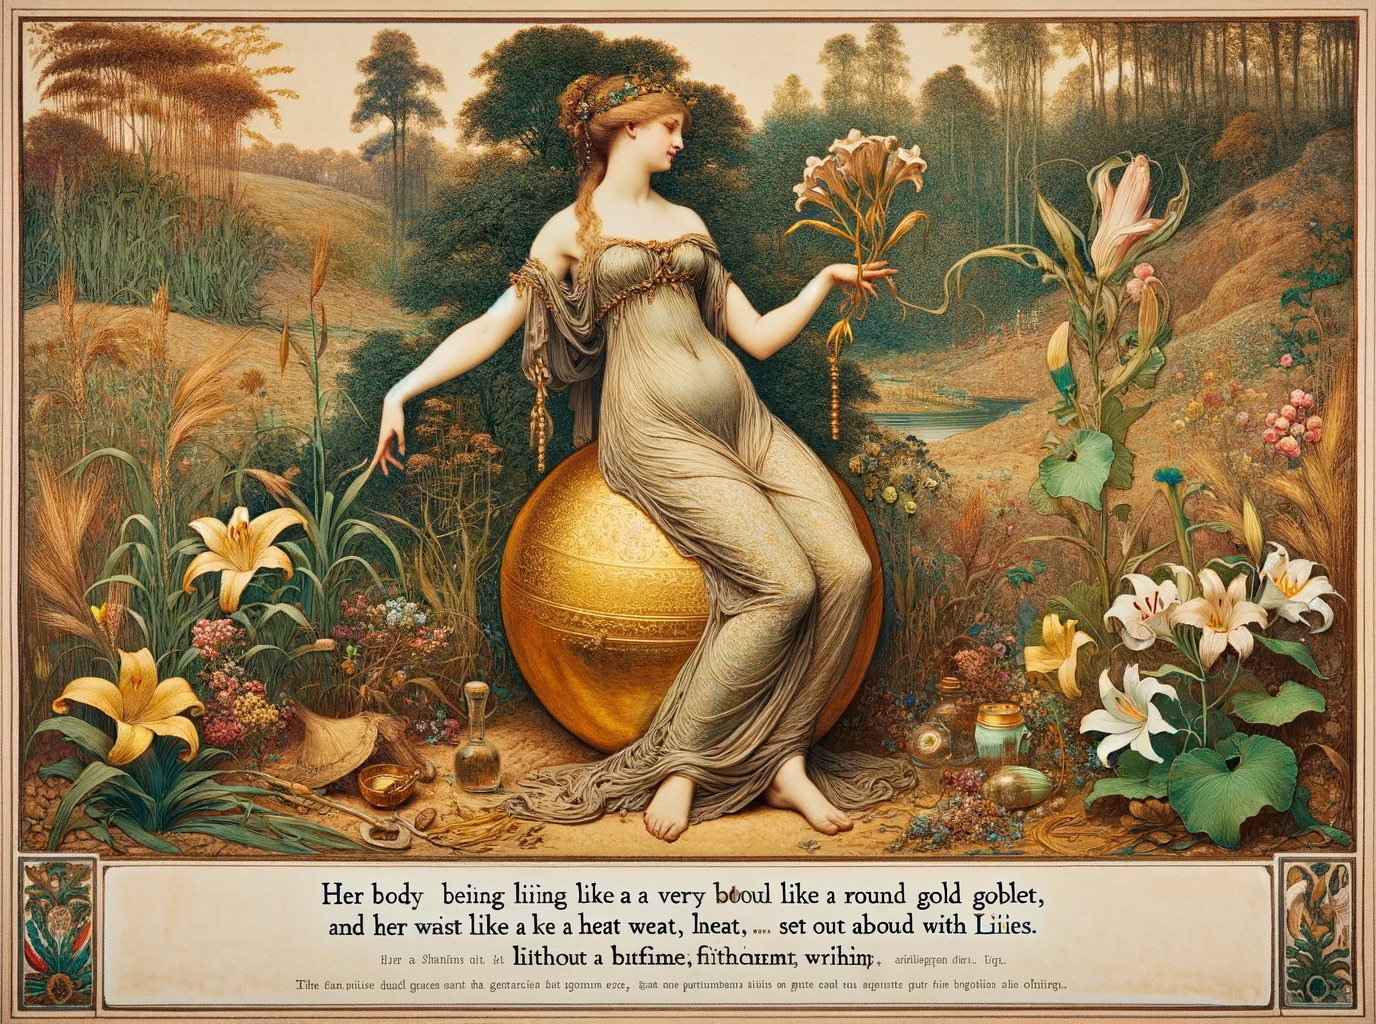 Ark.au Illustrated Bible - Song of Solomon 7:2 - Thy body is `like' a round goblet, `Wherein' no mingled wine is wanting: Thy waist is `like' a heap of wheat Set about with lilies.